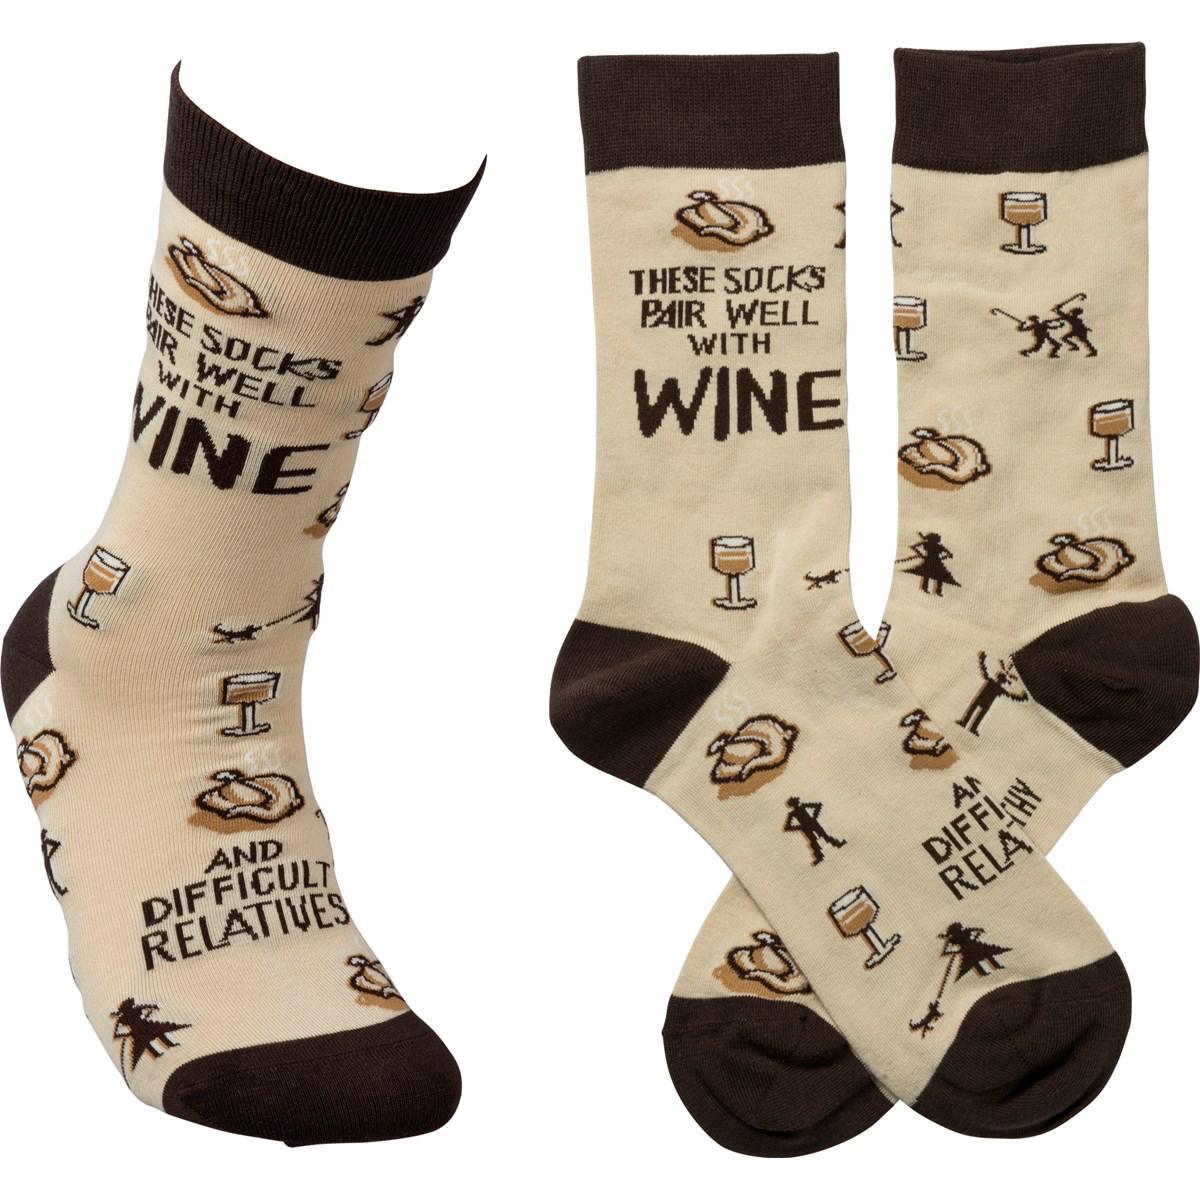 These Socks Pair Well With Wine Socks